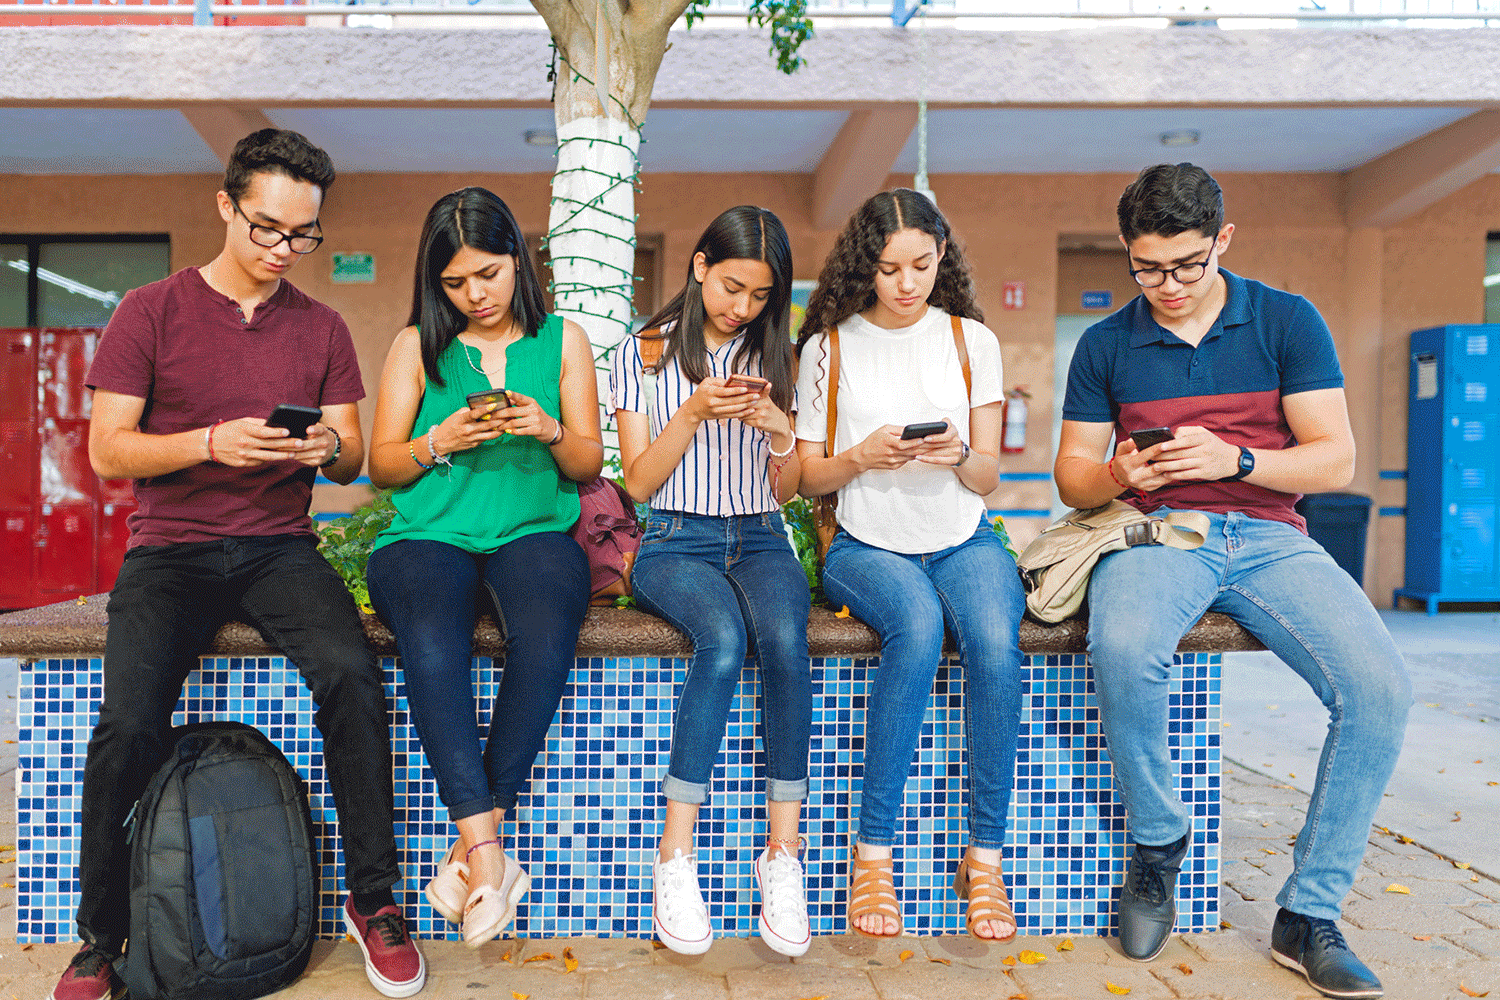 Animation of five students sitting on a ledge on their phones with text bubbles of their conversation appearing.